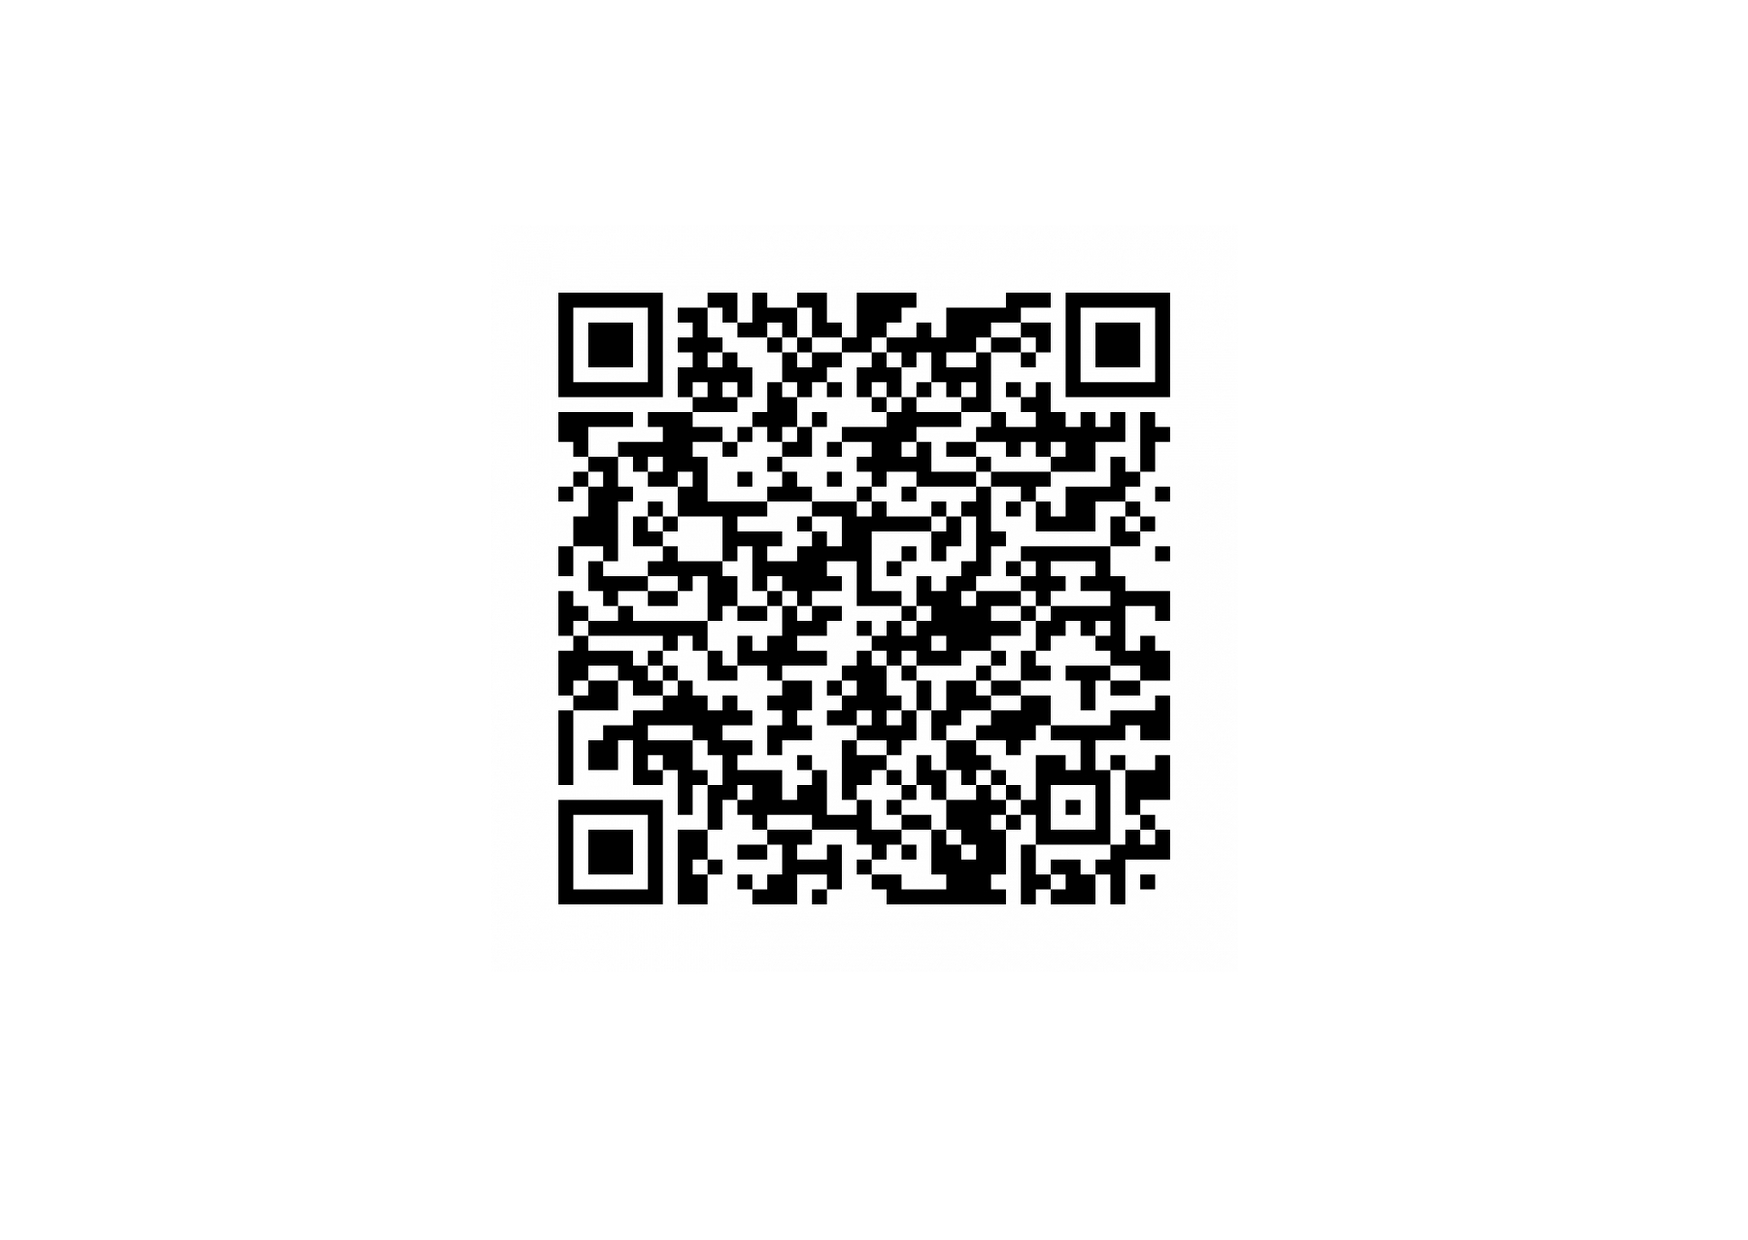 Donate quickly and simply on your phone by QR code